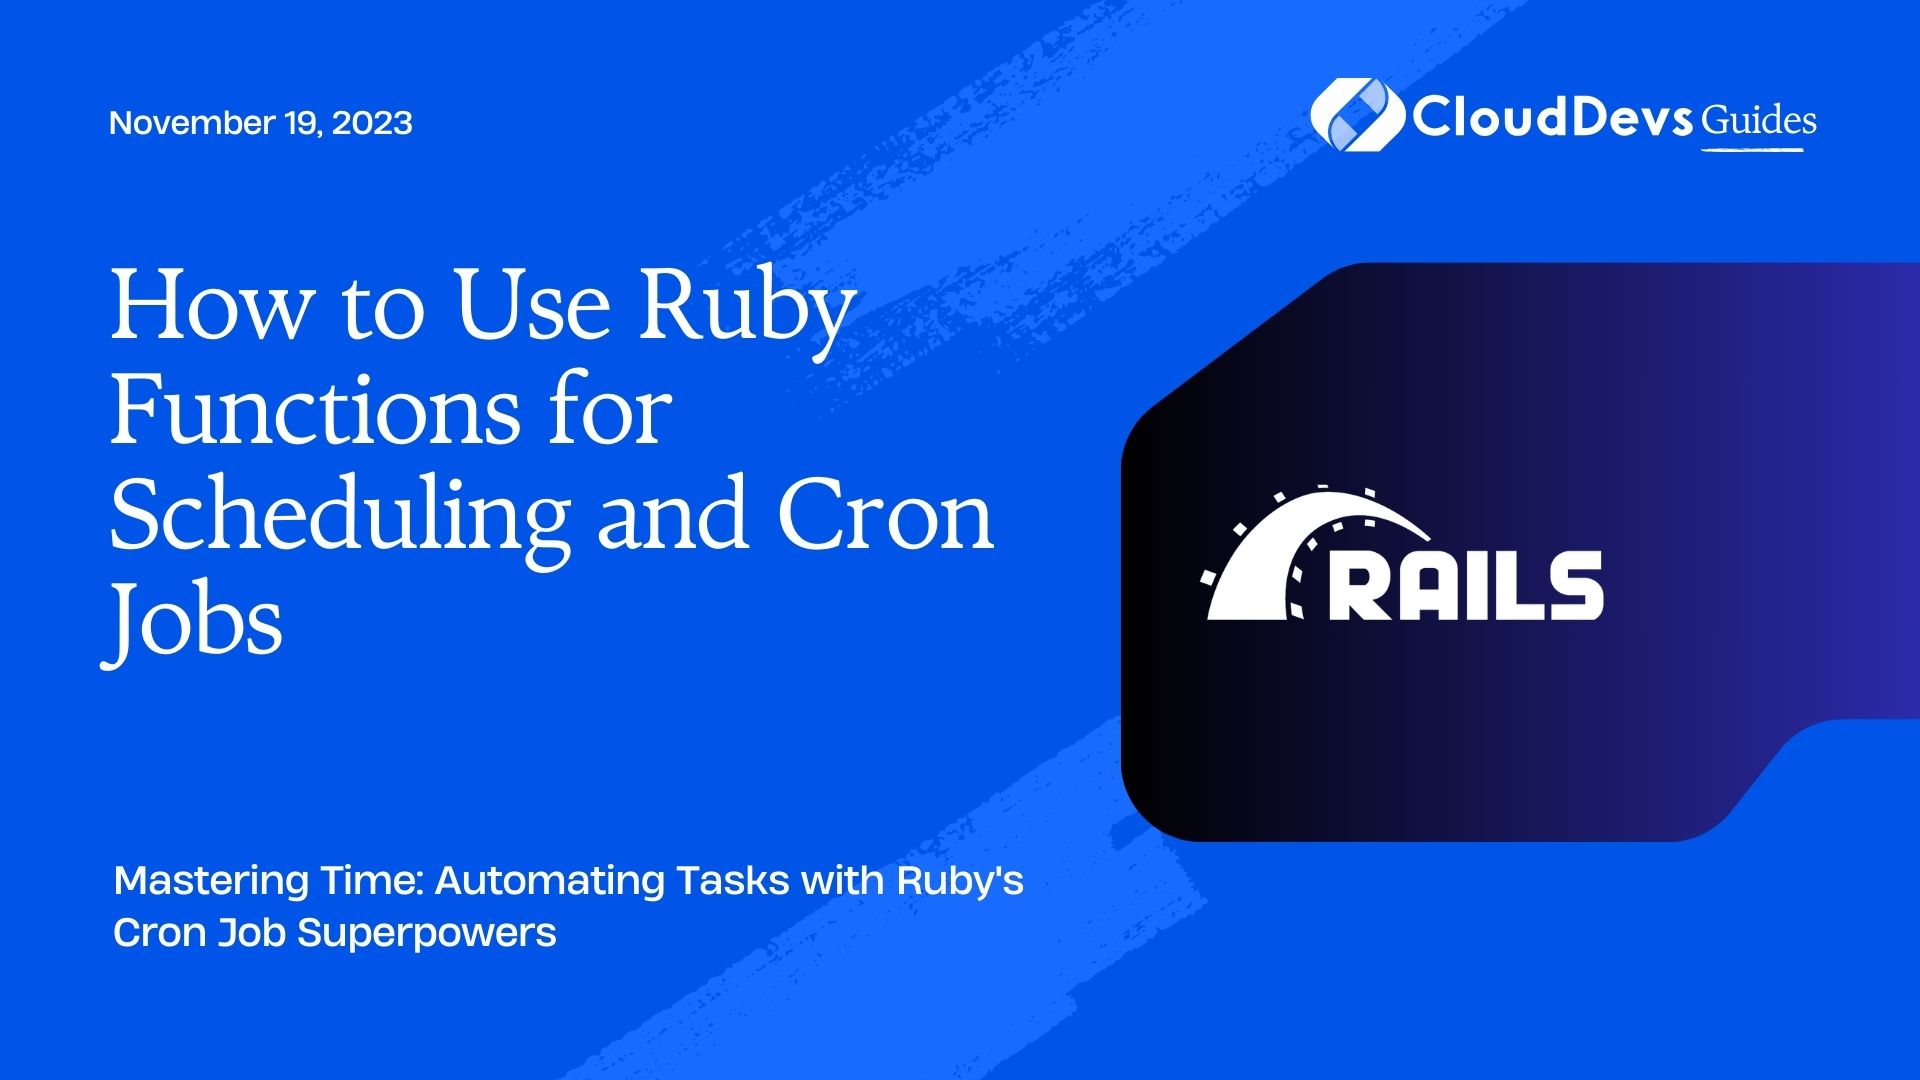 How to Use Ruby Functions for Scheduling and Cron Jobs